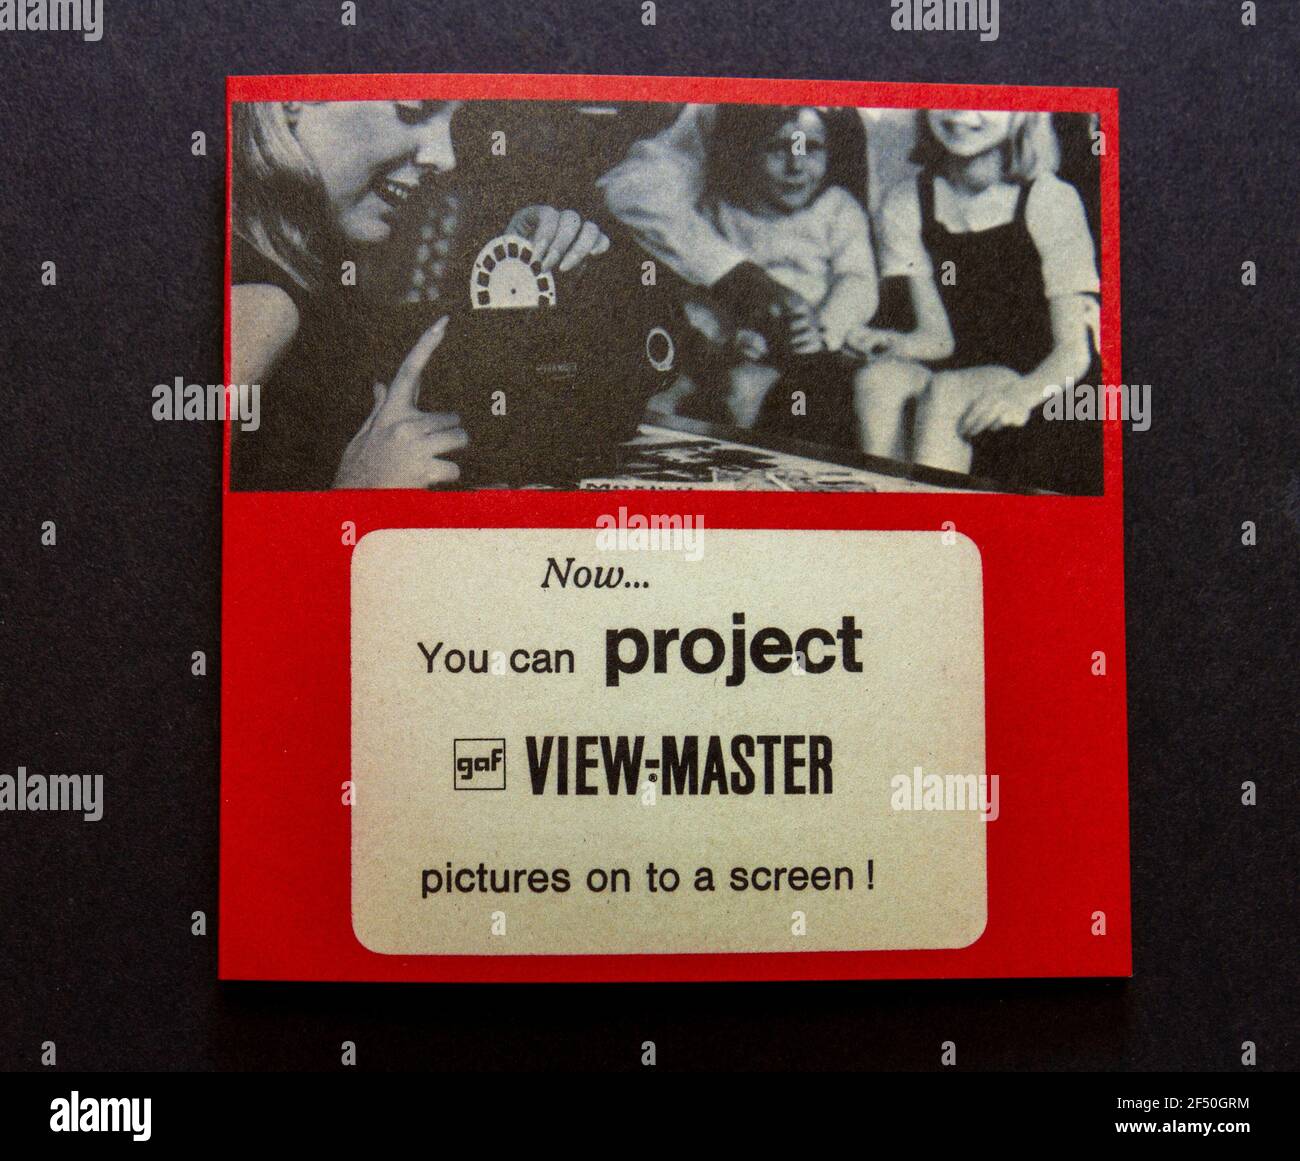 A replica leaflet advertising View-master slide projectors, (411 and 511), part of a school 1970s Childhood memorabilia pack. Stock Photo